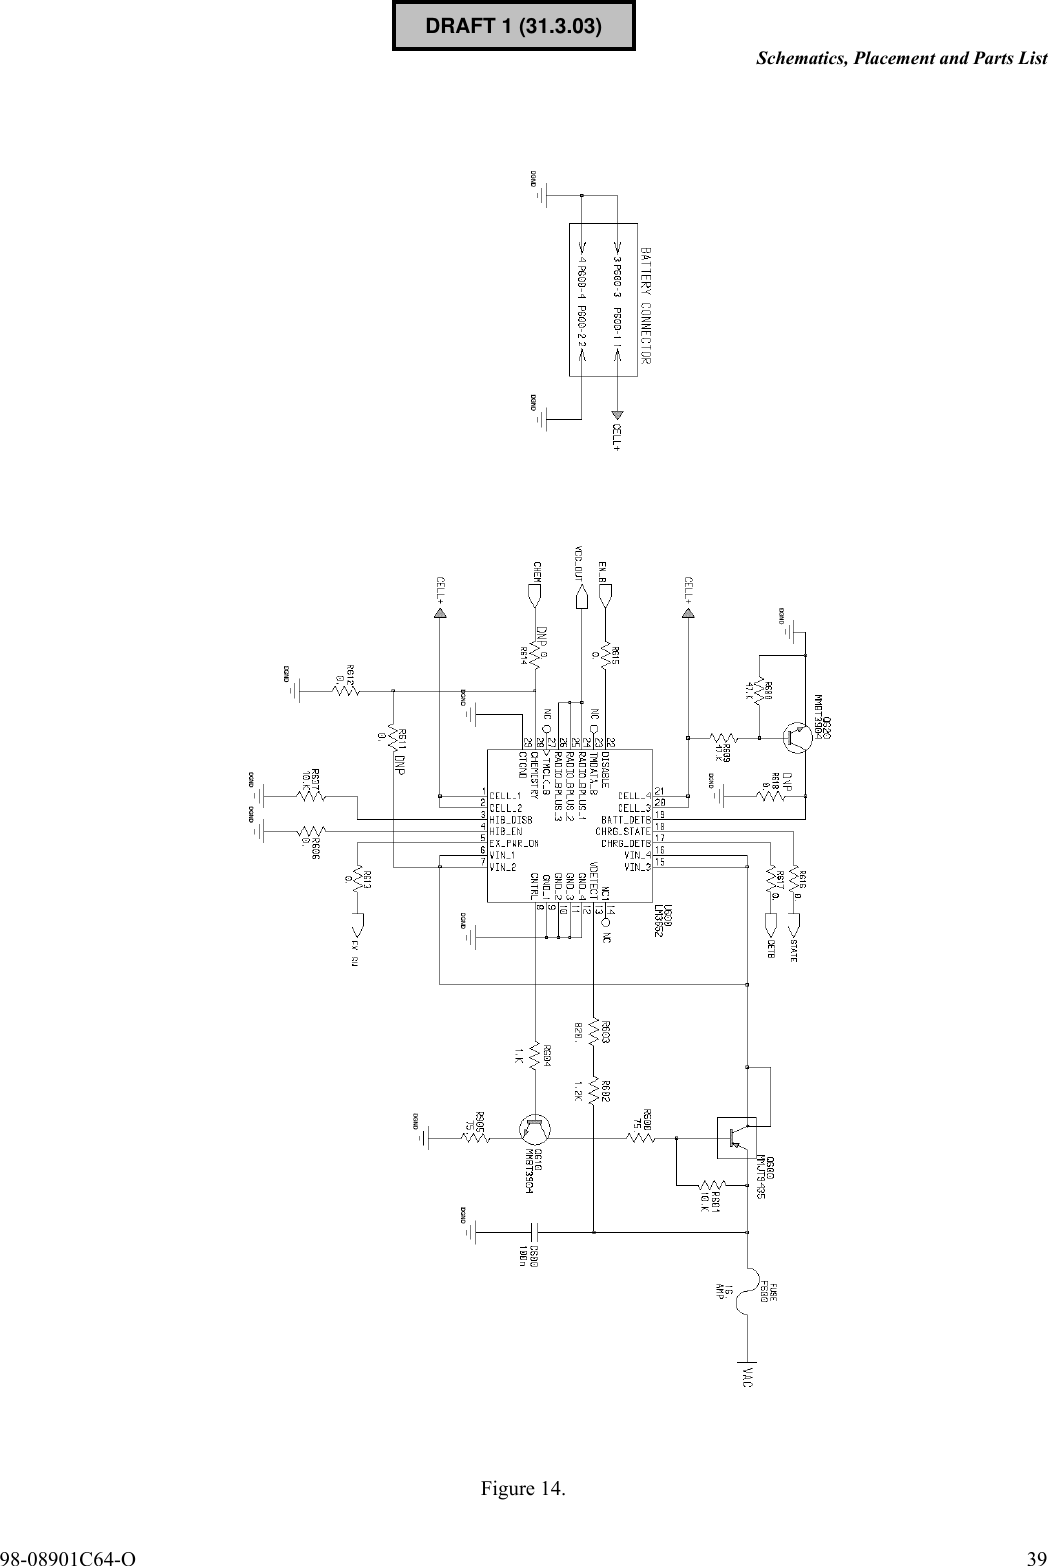 98-08901C64-O 39Schematics, Placement and Parts ListFigure 14.DRAFT 1 (31.3.03)